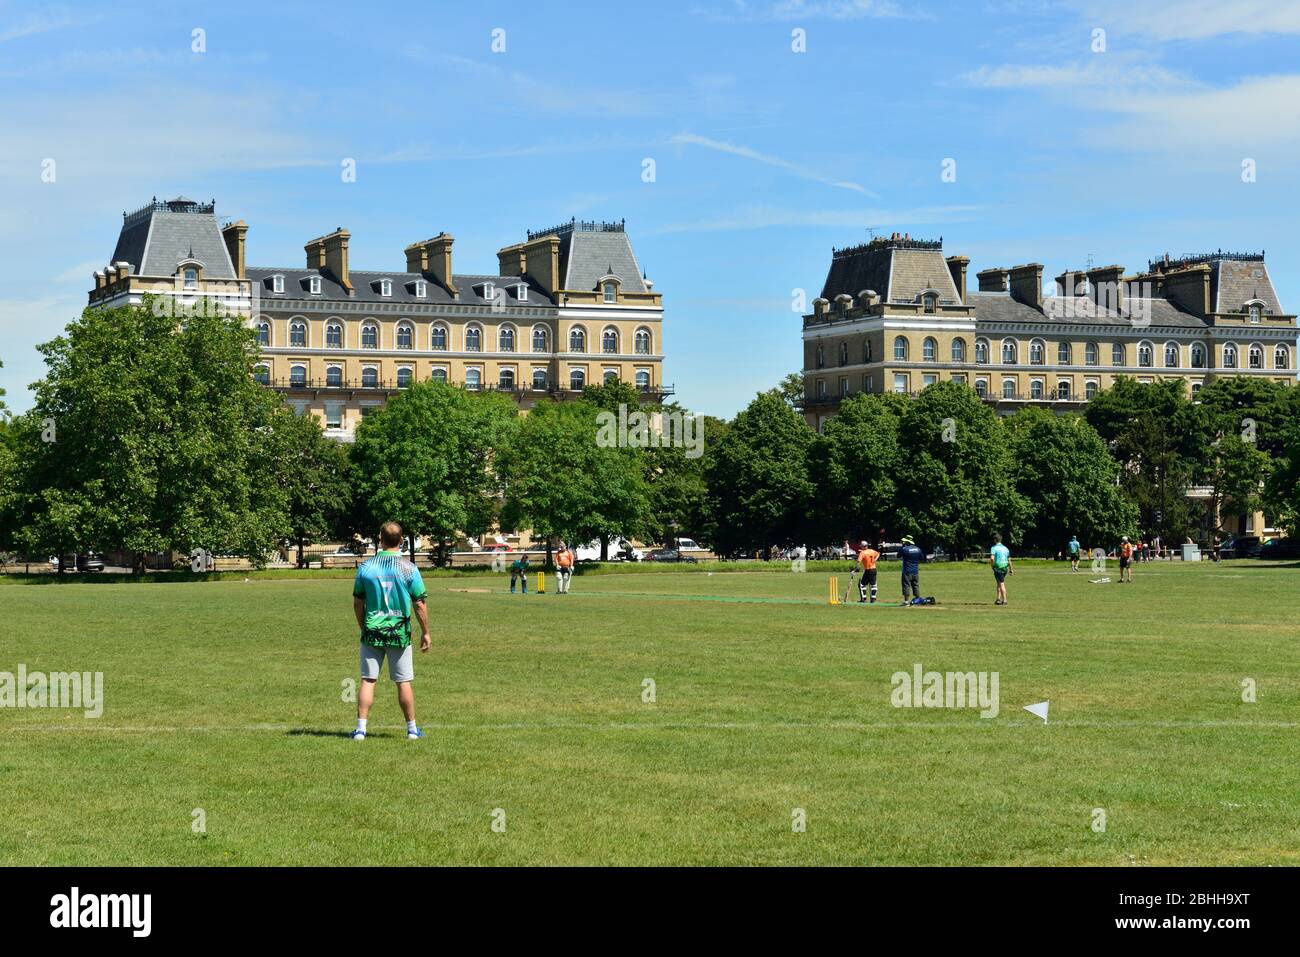 cricket on Clapham Common Playing Fields, Clapham Common North Side, Londres, Reino Unido Foto de stock